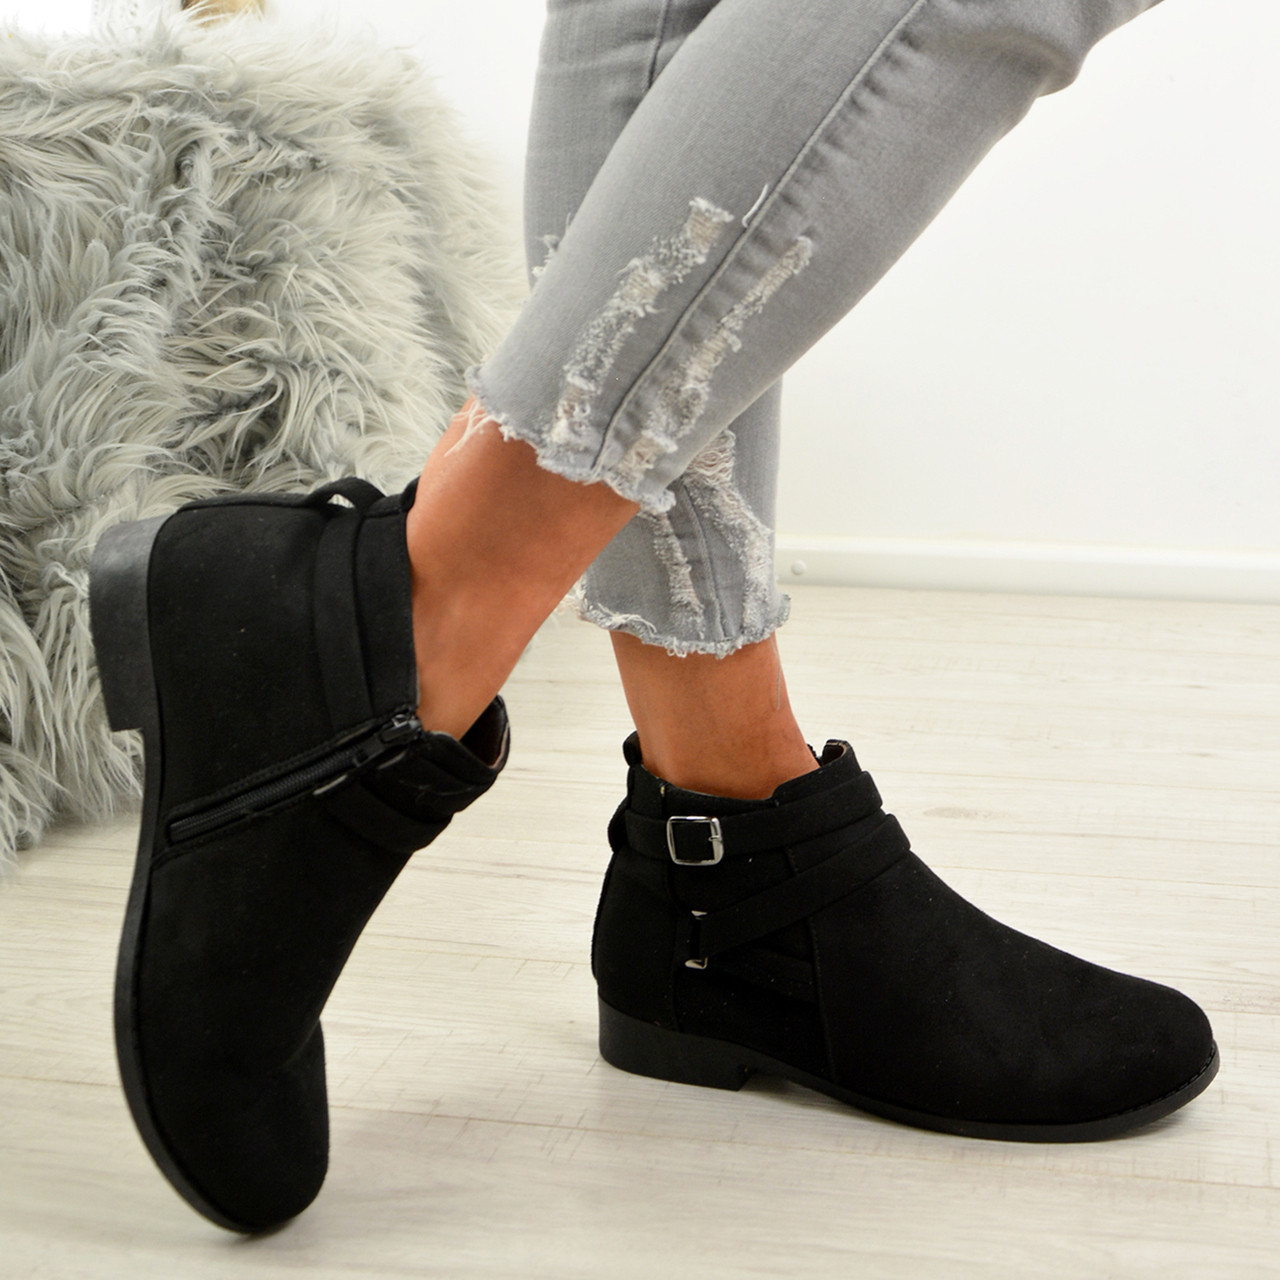 womens black suede ankle boots low heel 